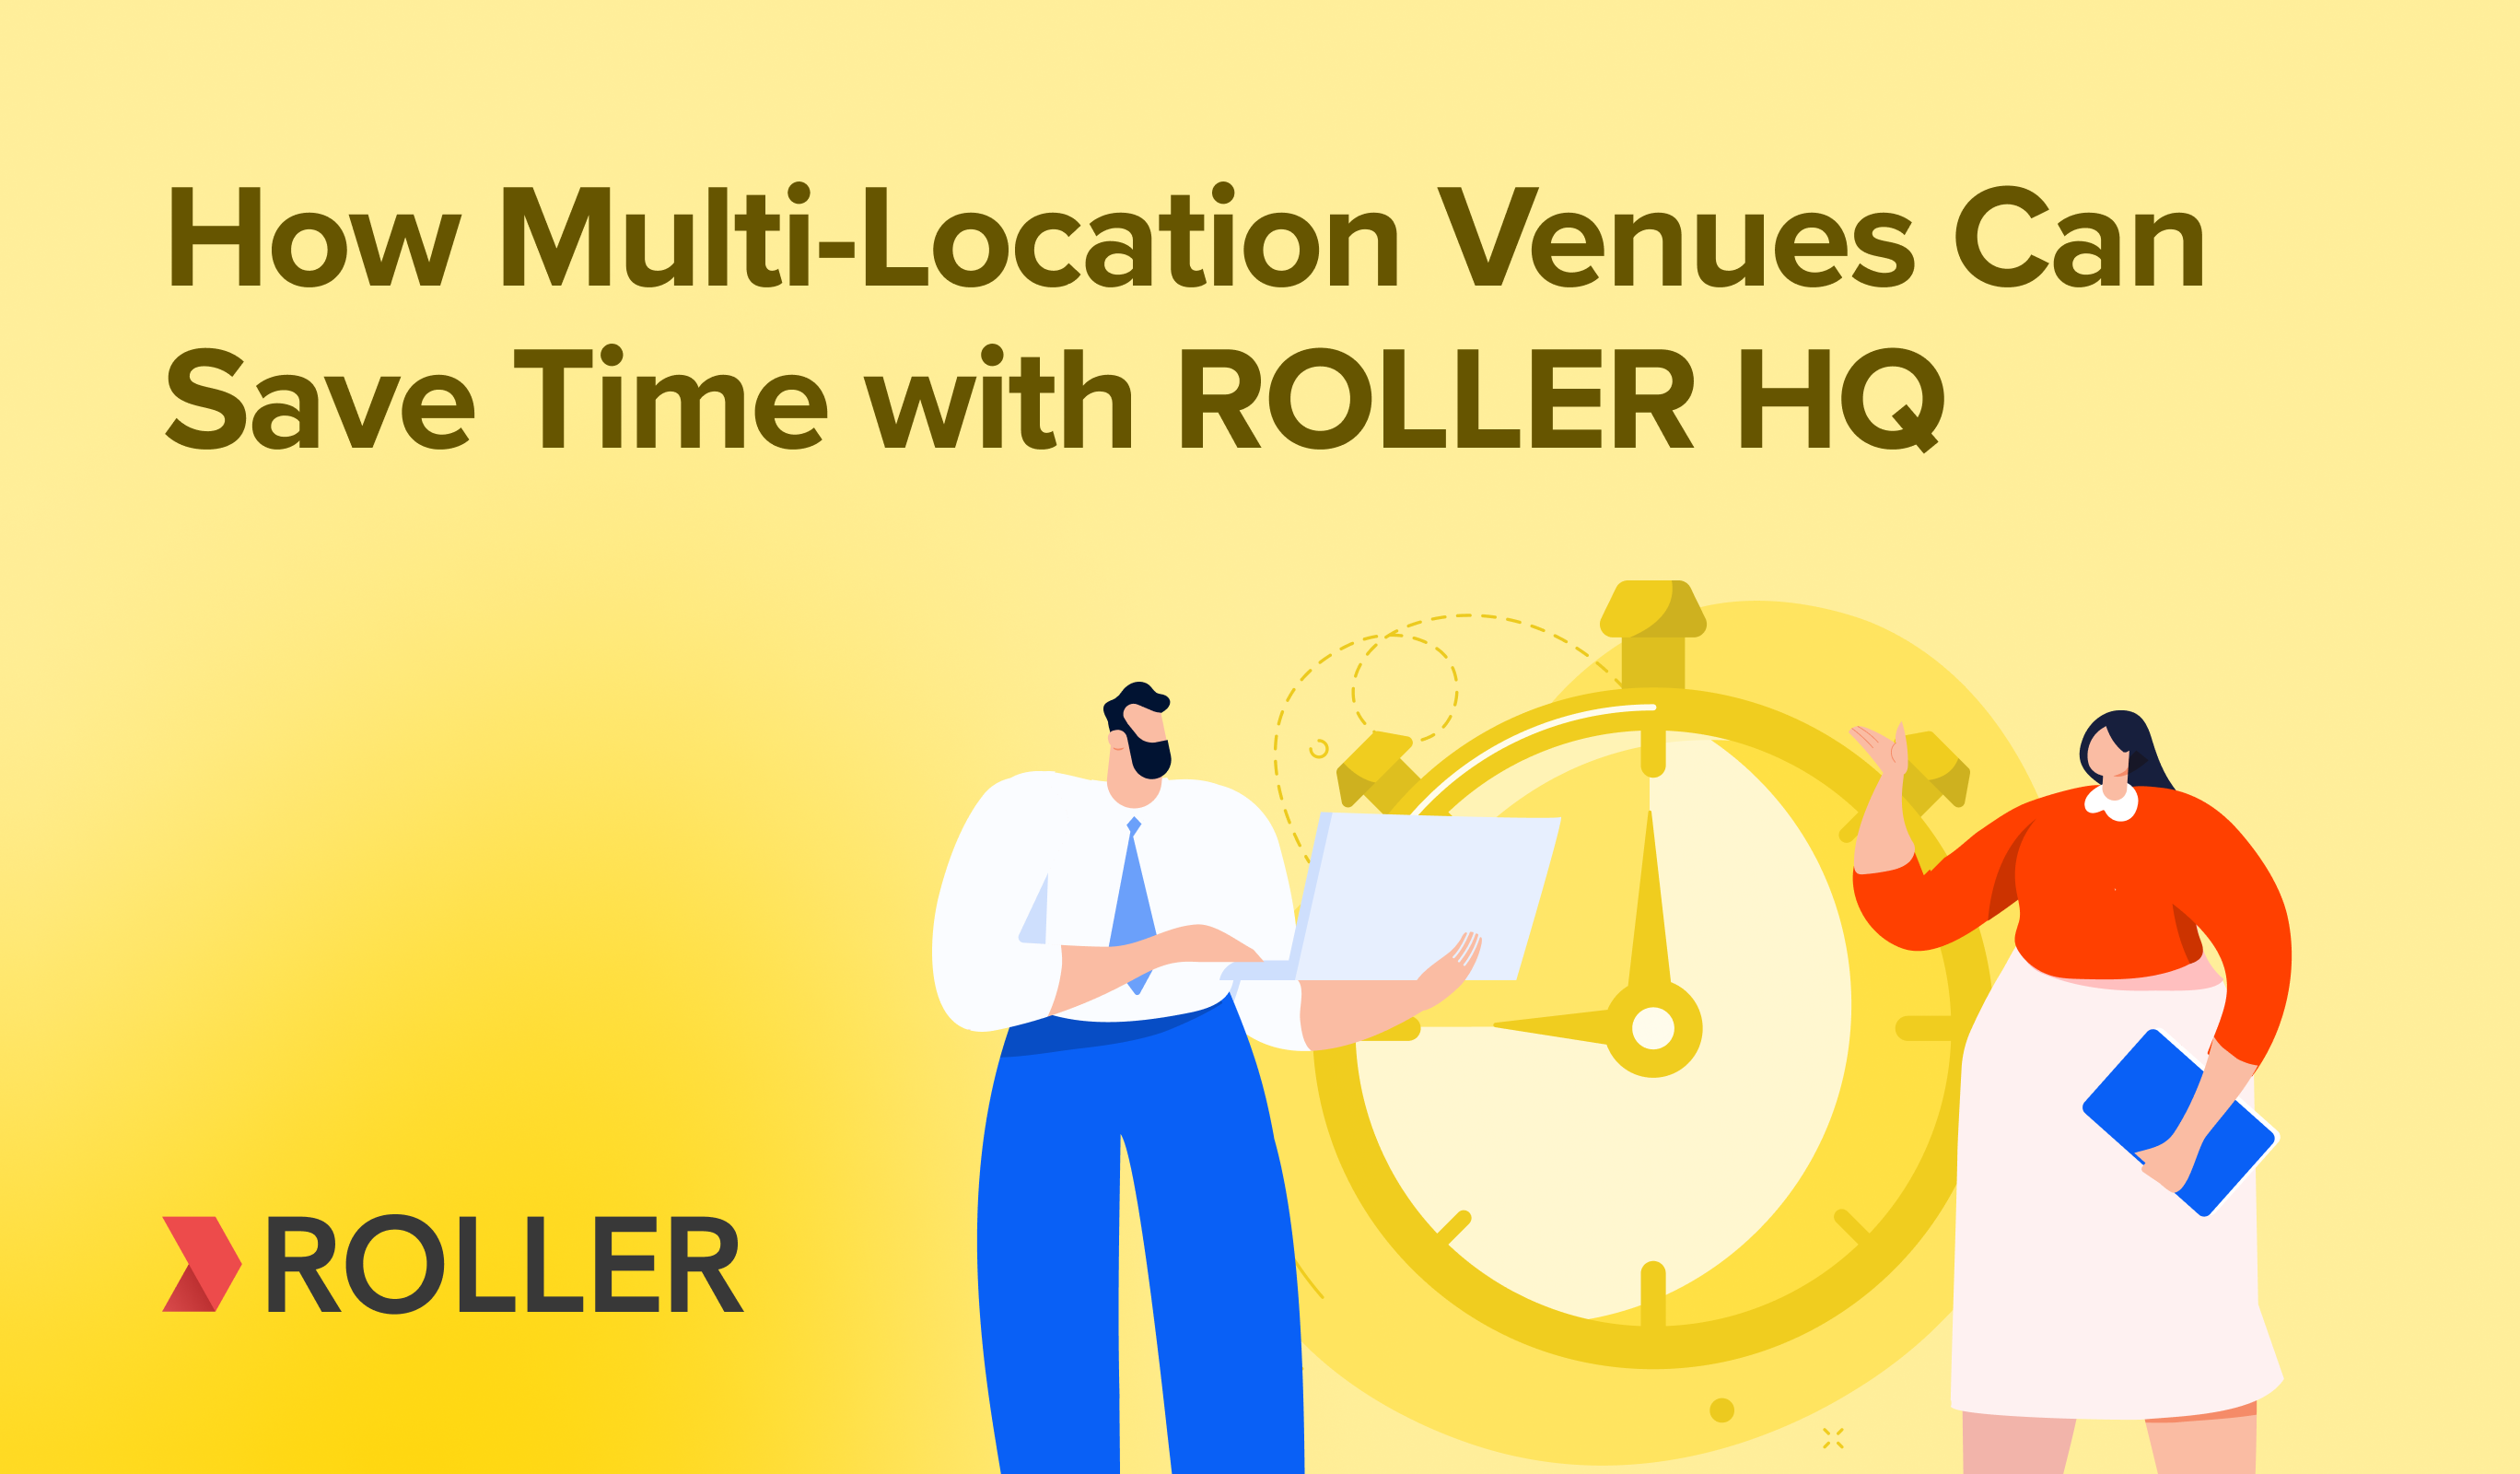 How Multi-Location Venues can Save Time with ROLLER HQ